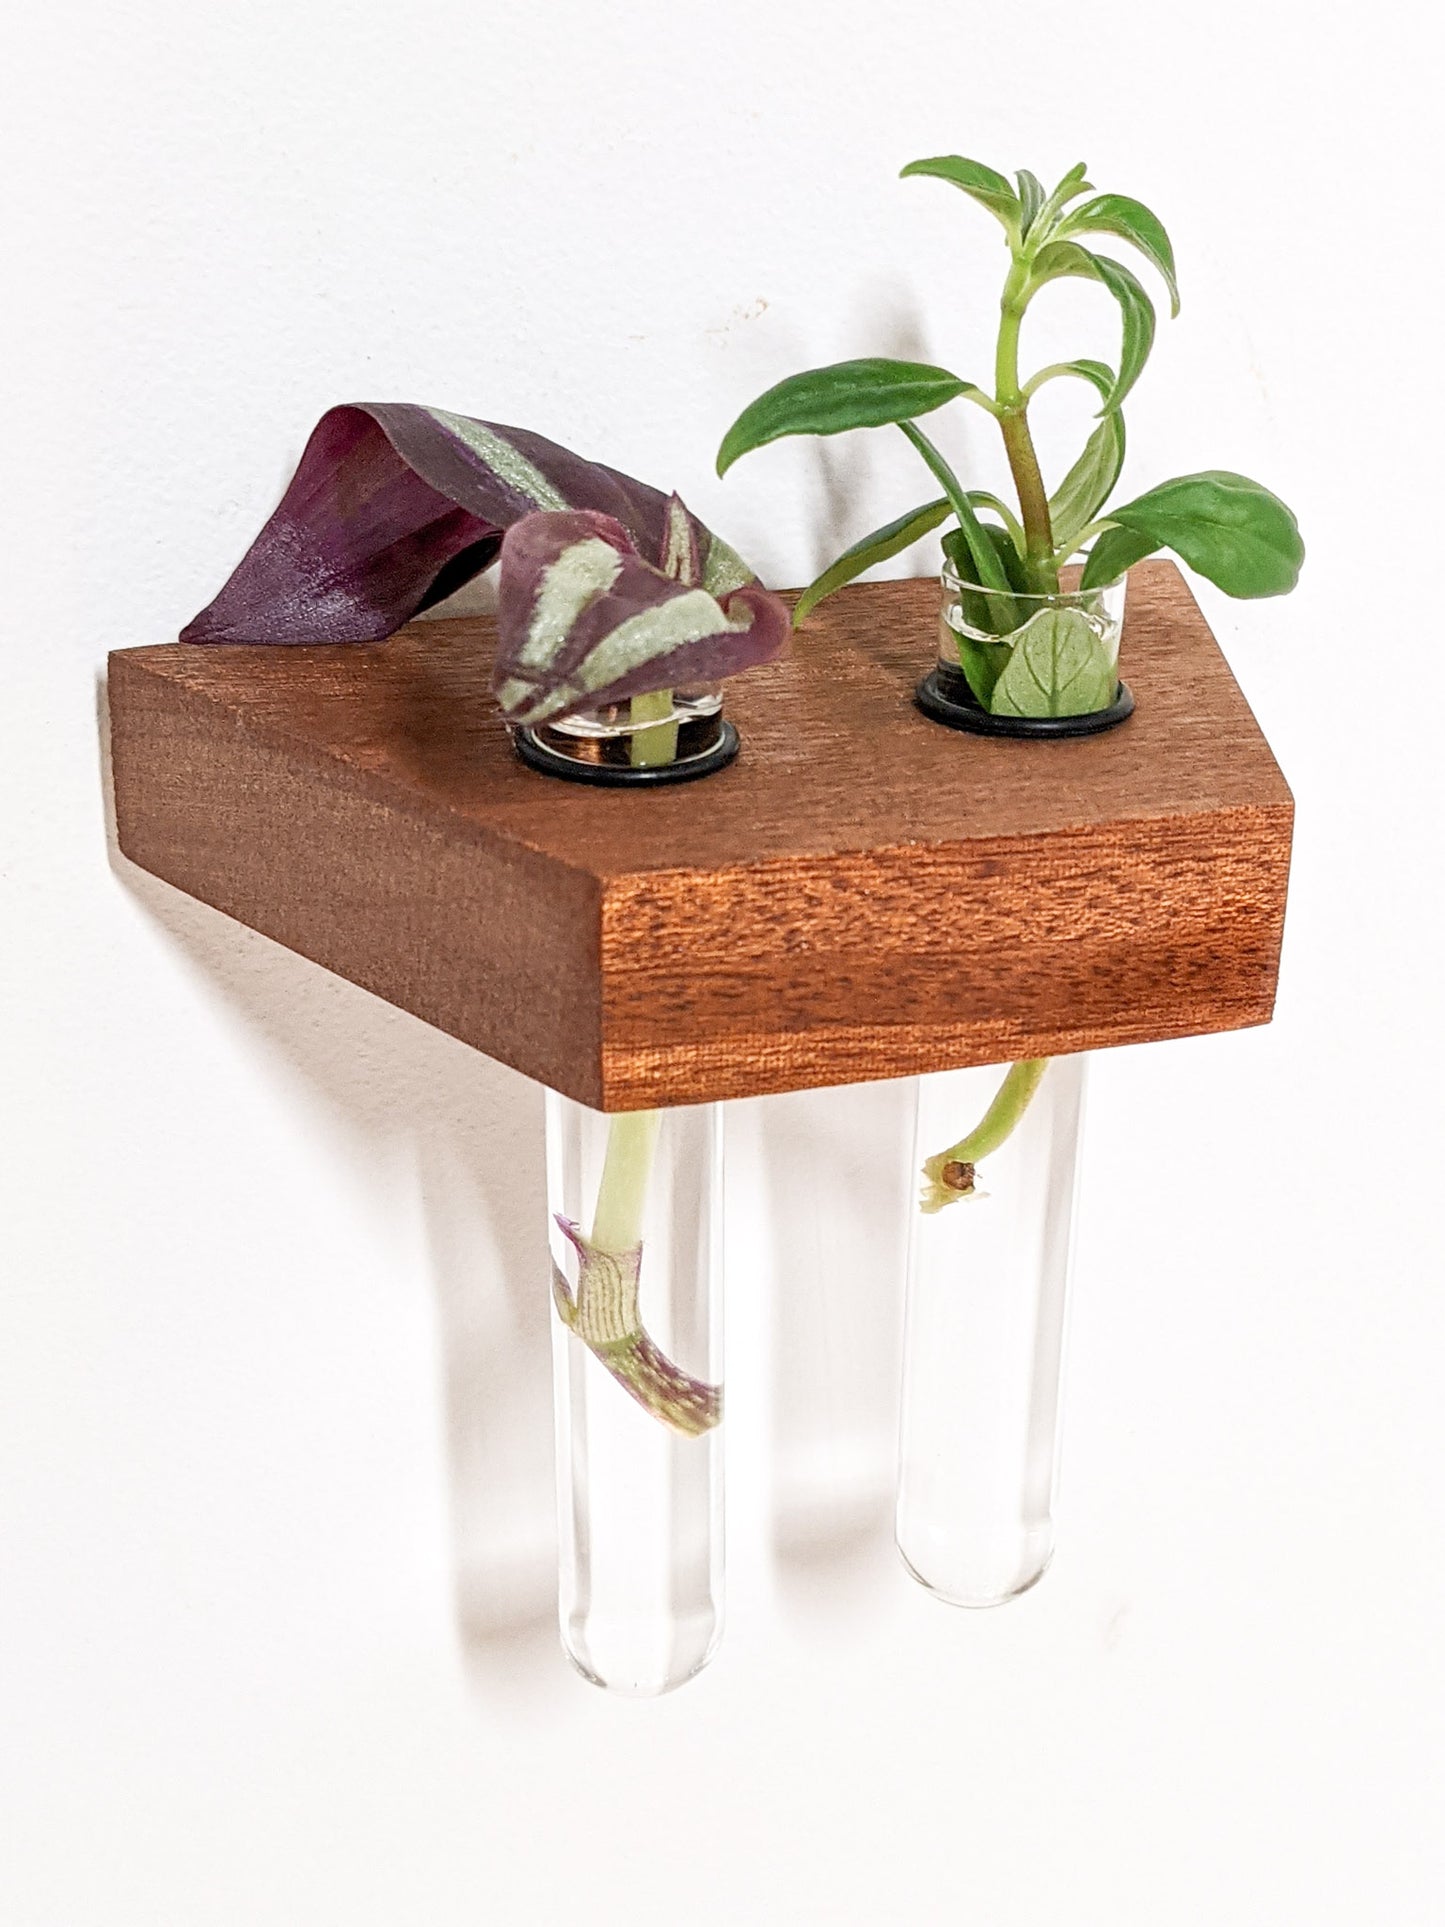 A small mahogany propagation shelf is wall-mounted. Two test tubes securely fits within the provided hole and a vibrant wandering jew cutting sits within the test tubes. One is purple and the other is green.